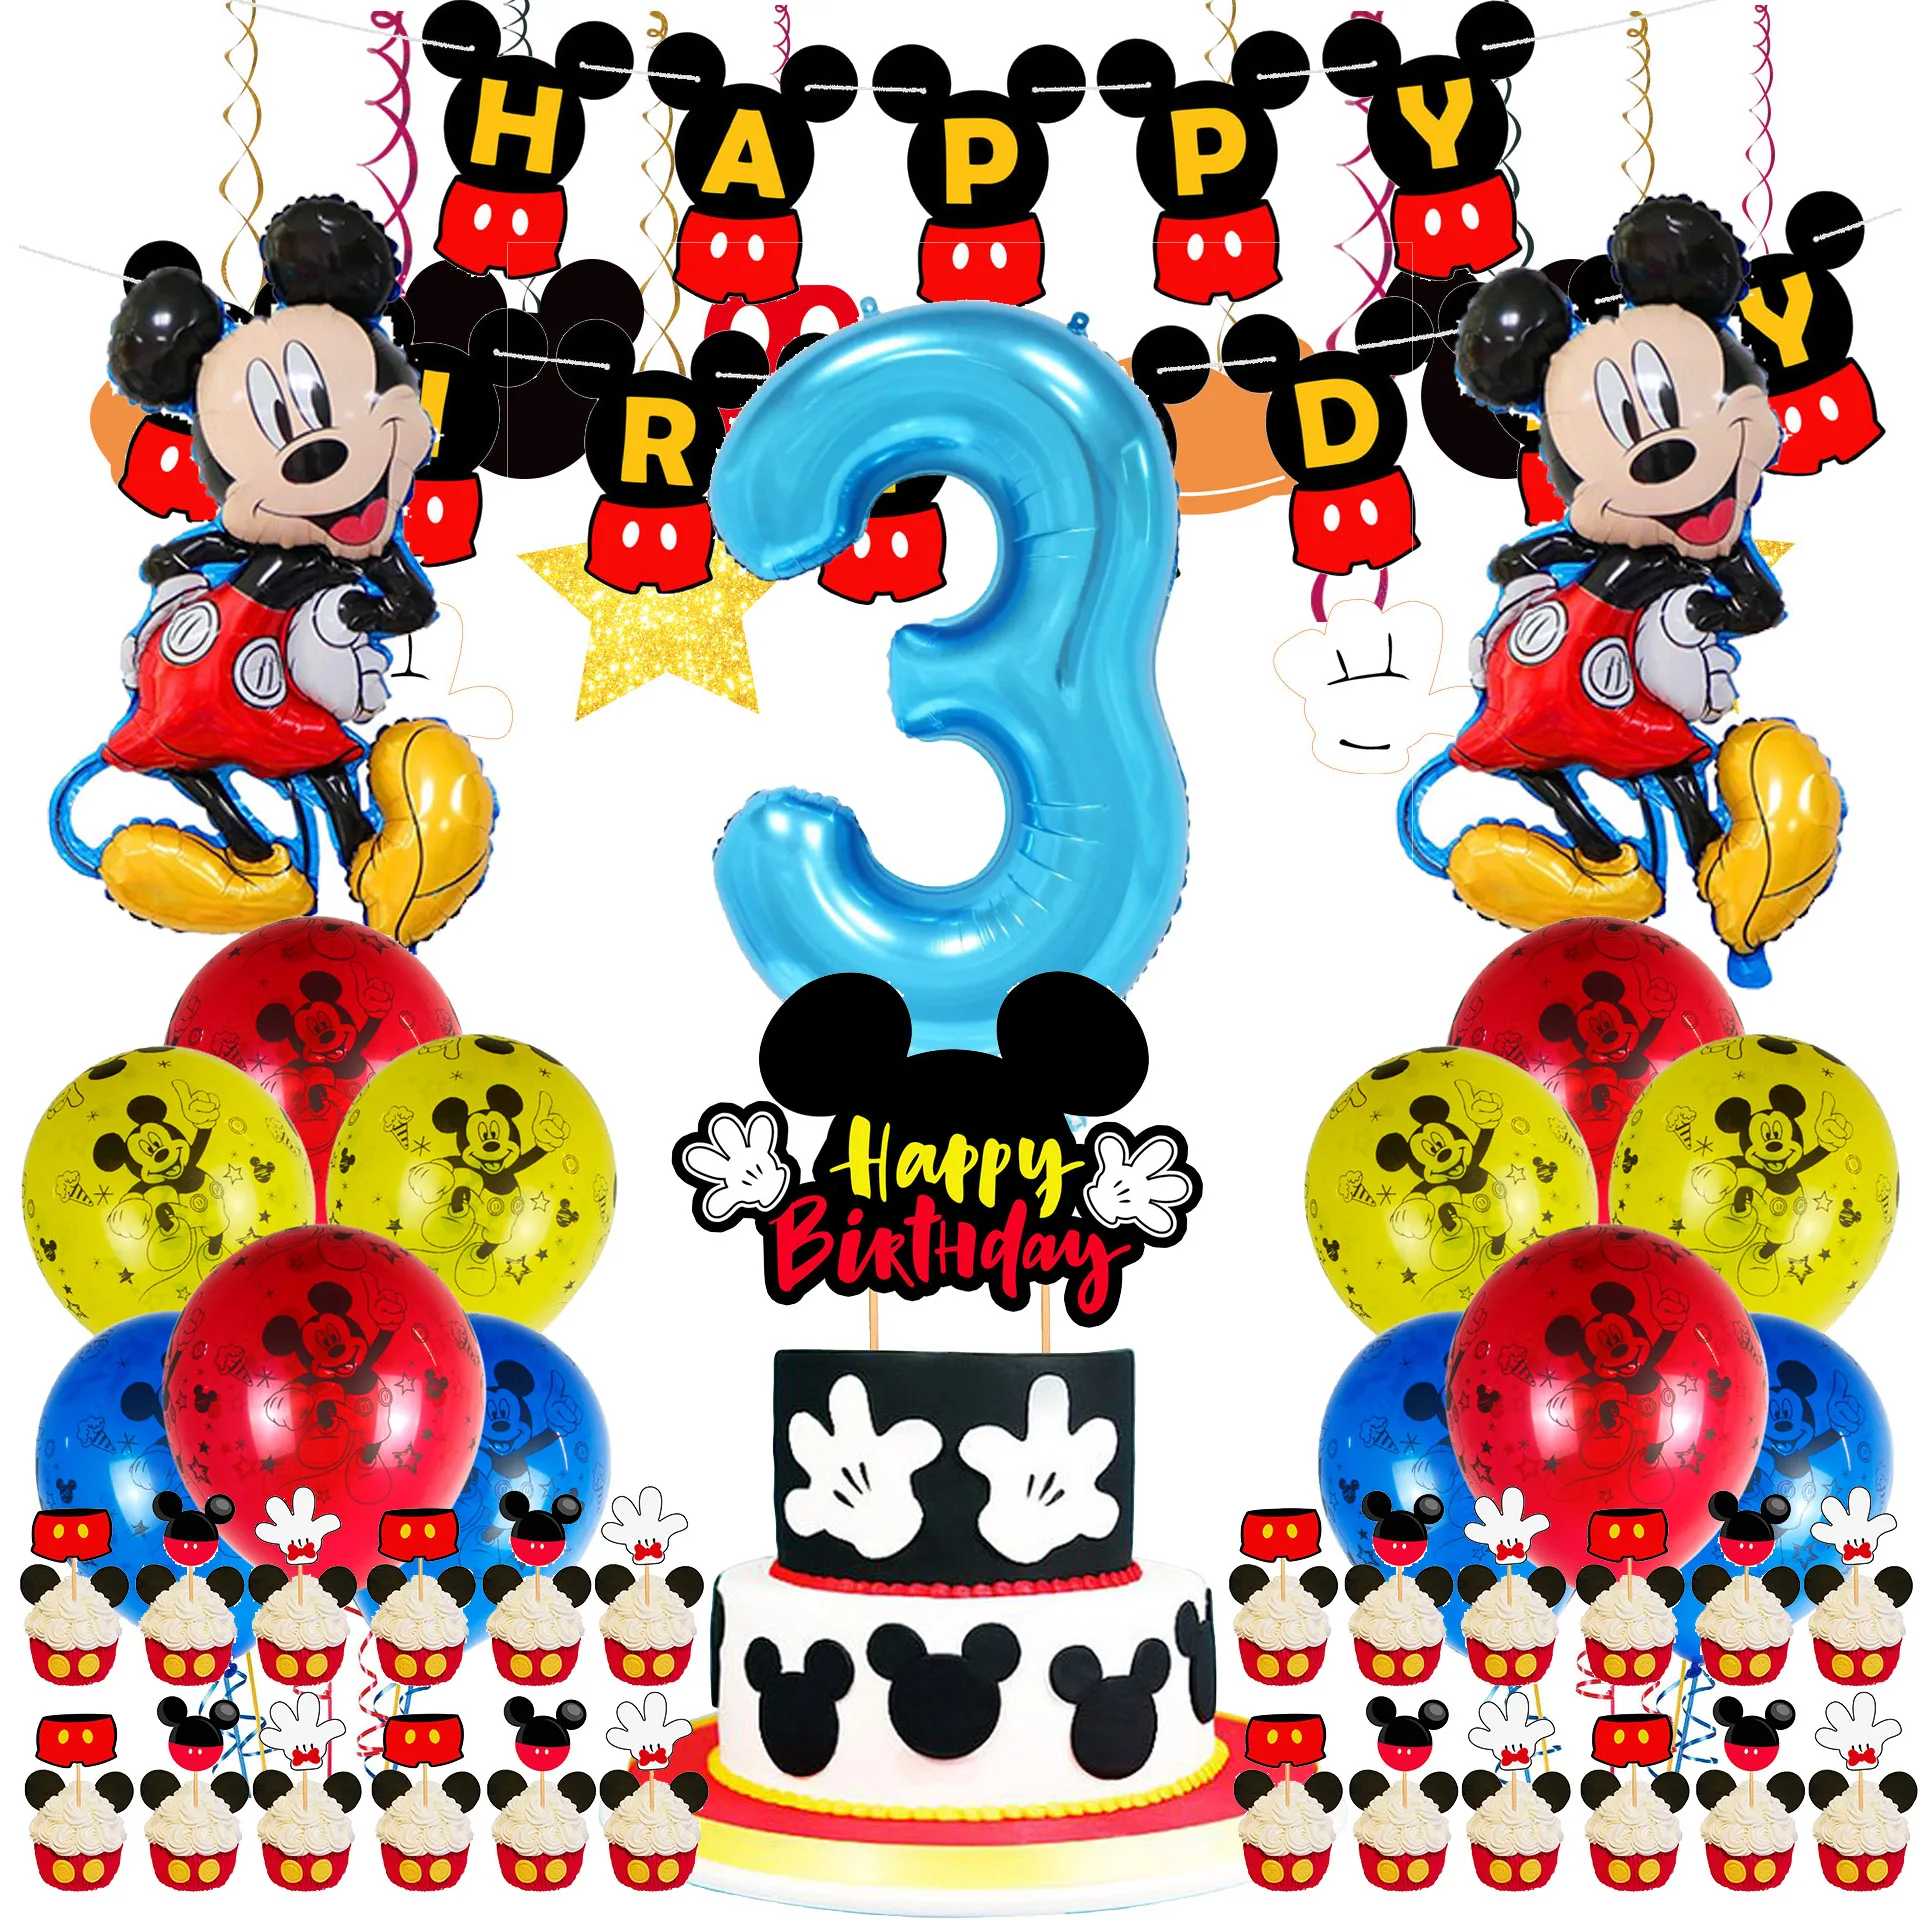 Mickey Mouses Theme Party Supplies Happy Birthday Banner Cucake Cake Topper Number 1 2 3Balloon For Baby Shower Party Decoration